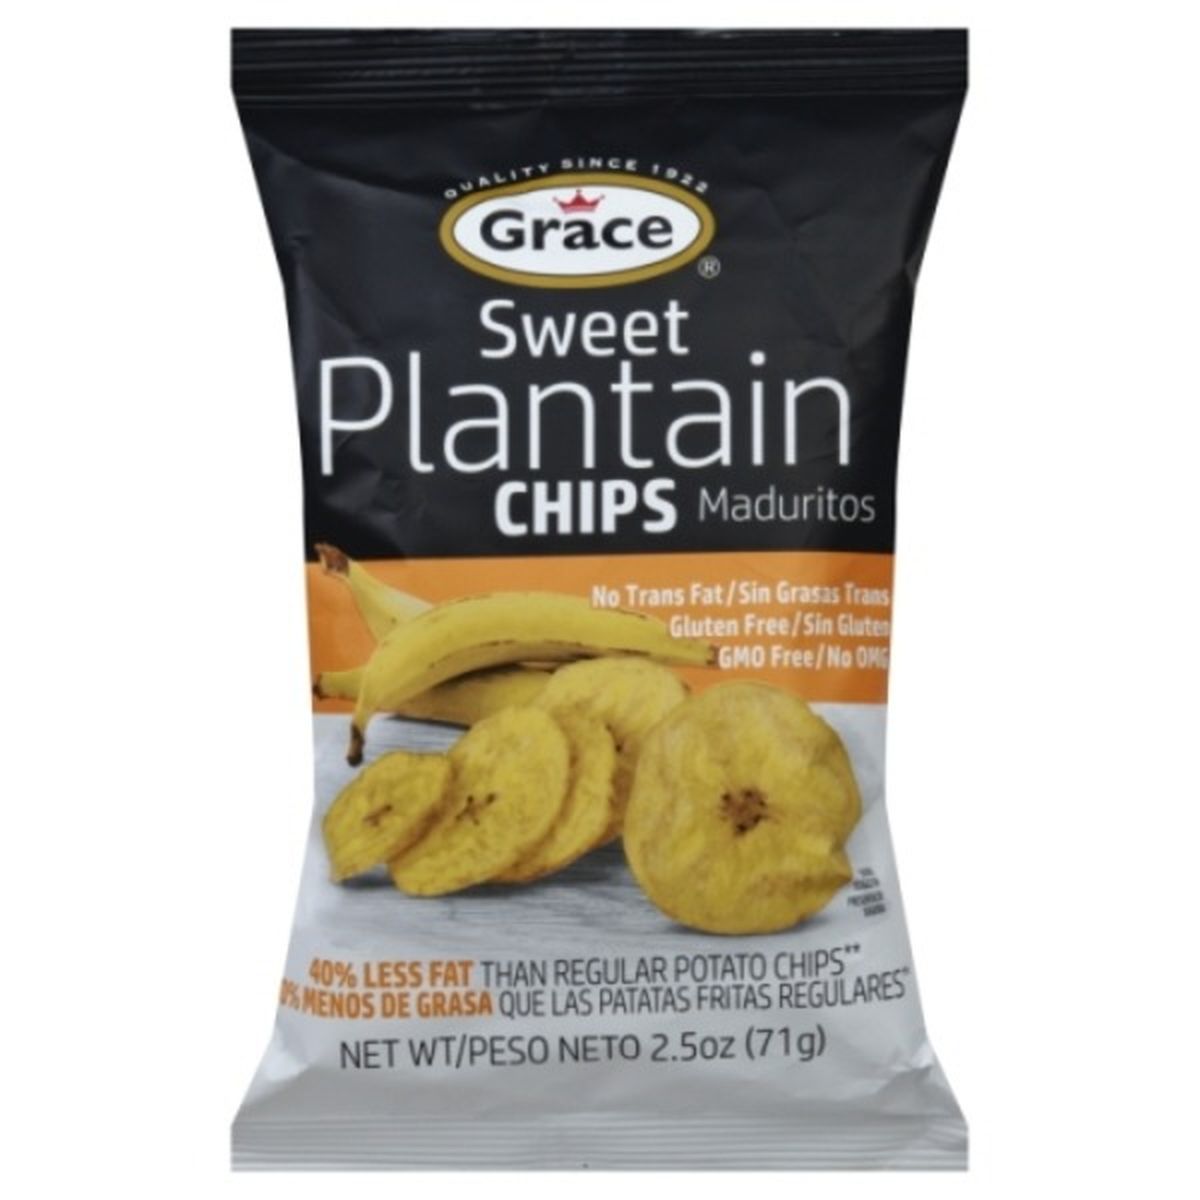 Calories in Grace Chips, Sweet Plantain